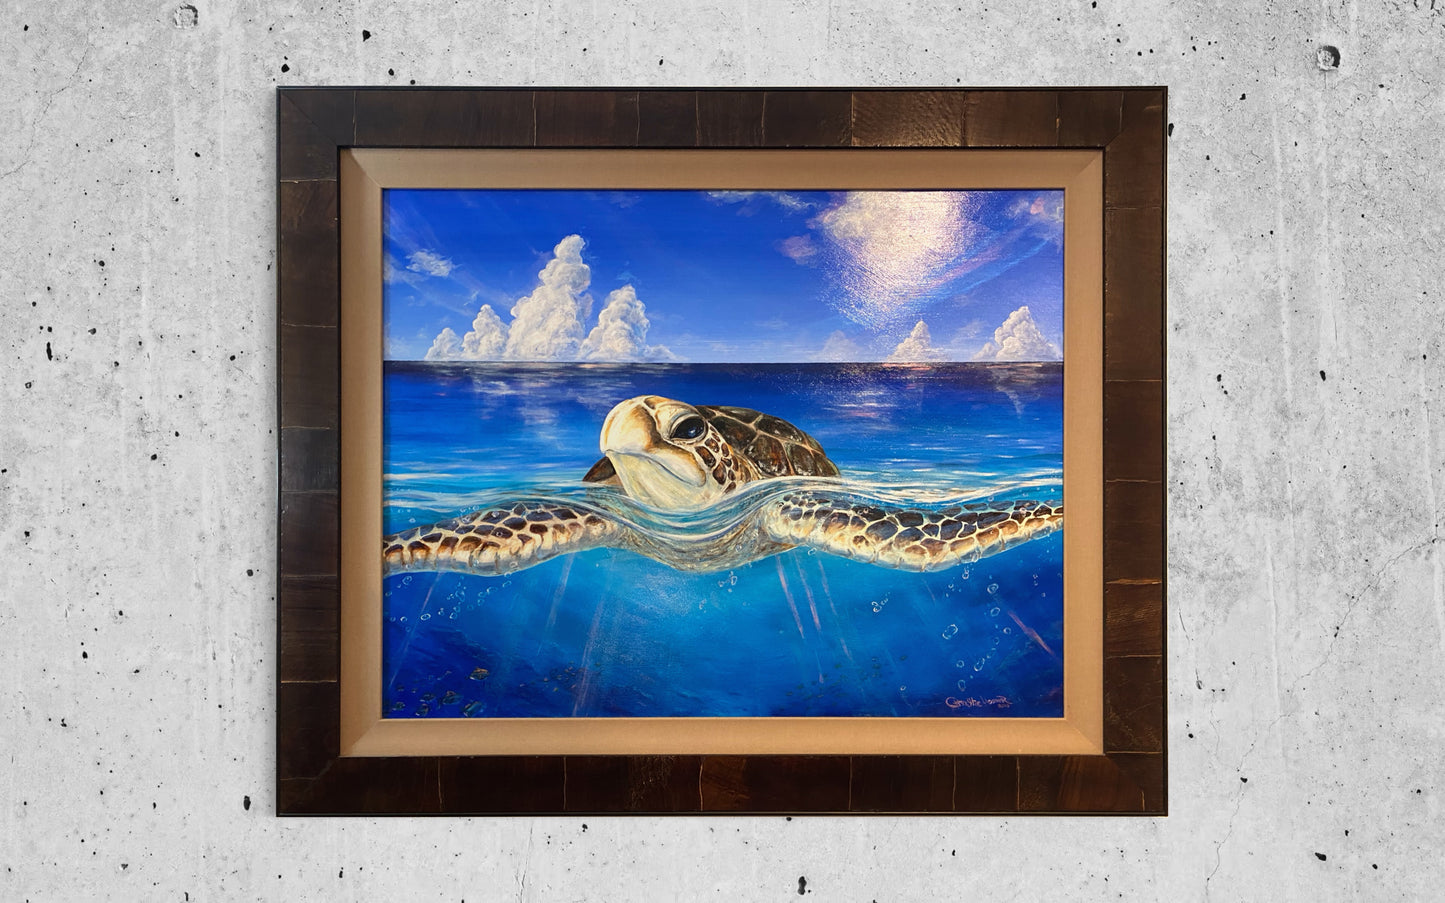 A Peace of the Tropics - Tropical Sea Turtle Art - Large Original Oil Painting - Tropical Hawaiian Ocean Art by Christie Marie E Russell ©